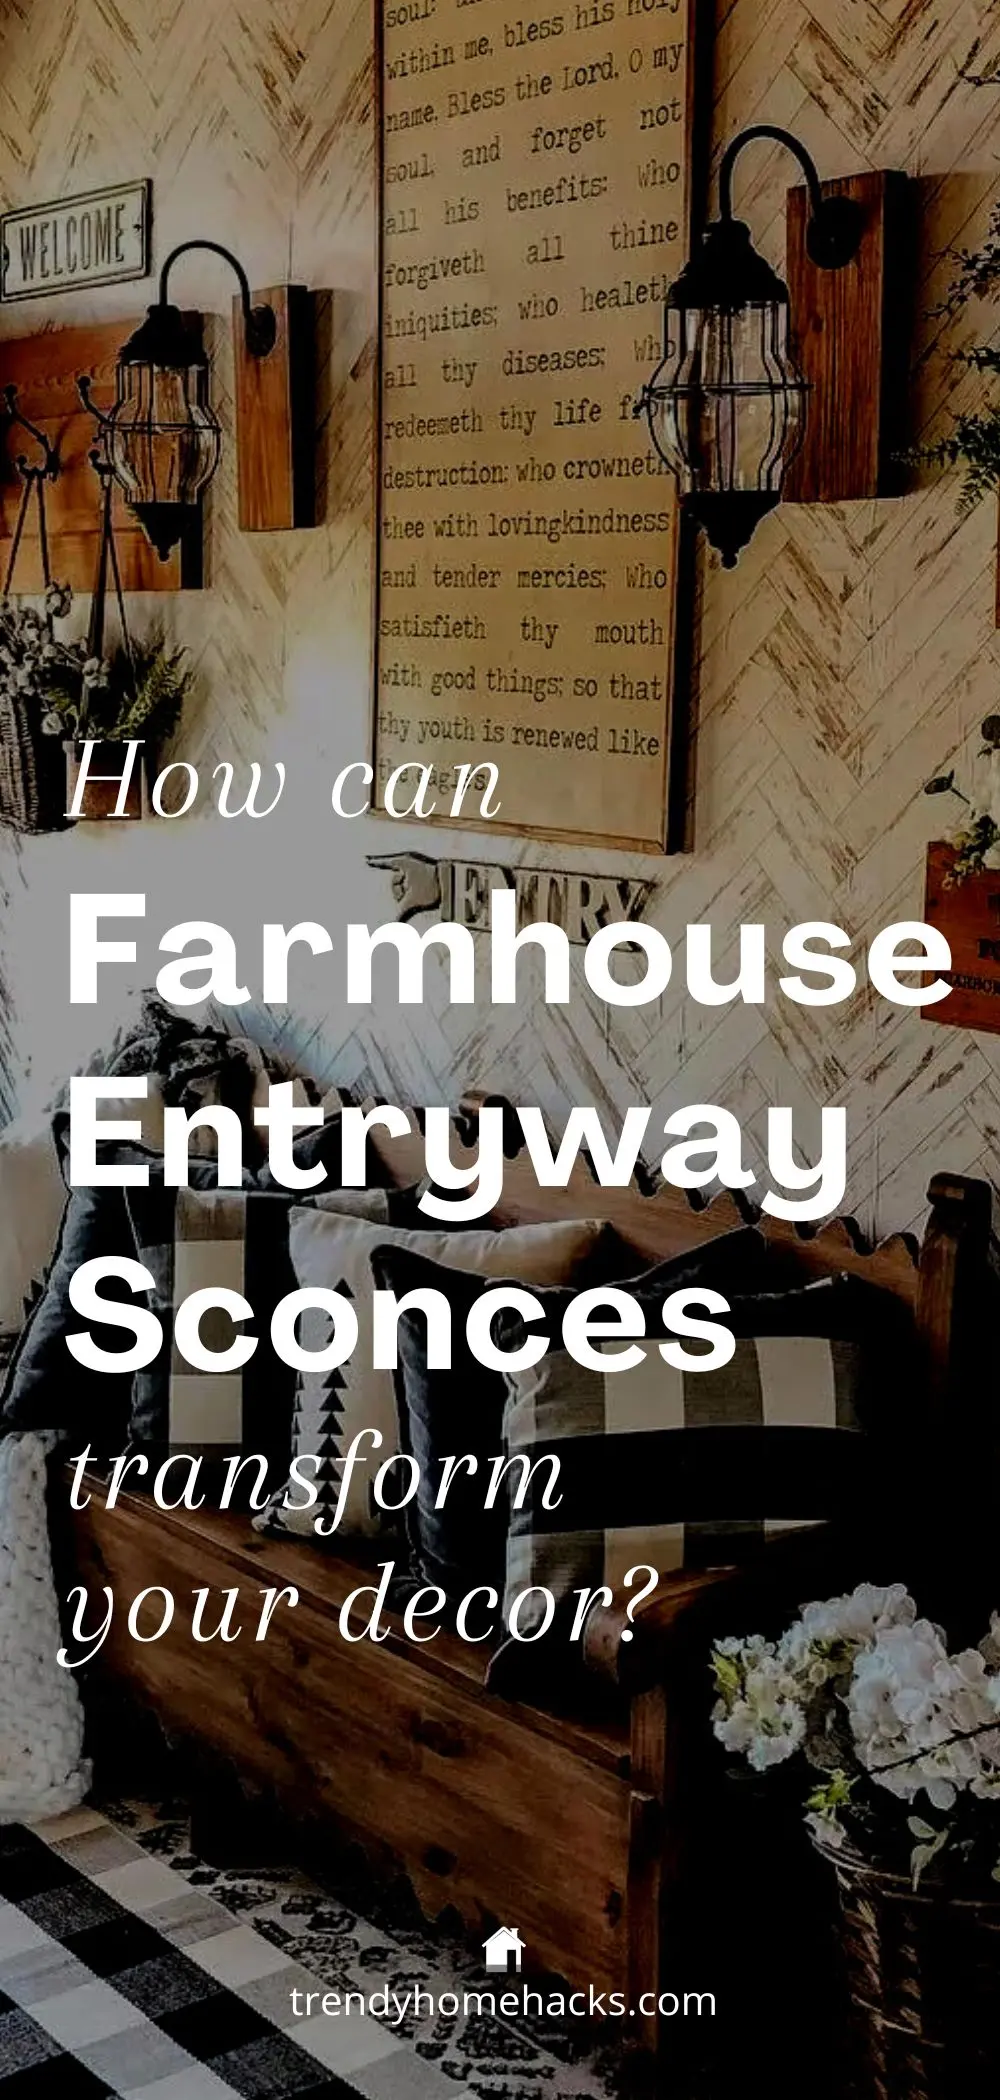 a dark background image with the text overlay "How can Farmhouse Entryway Sconces transform your decor?" making it easy to bookmark this post on Pinterest for future reference.